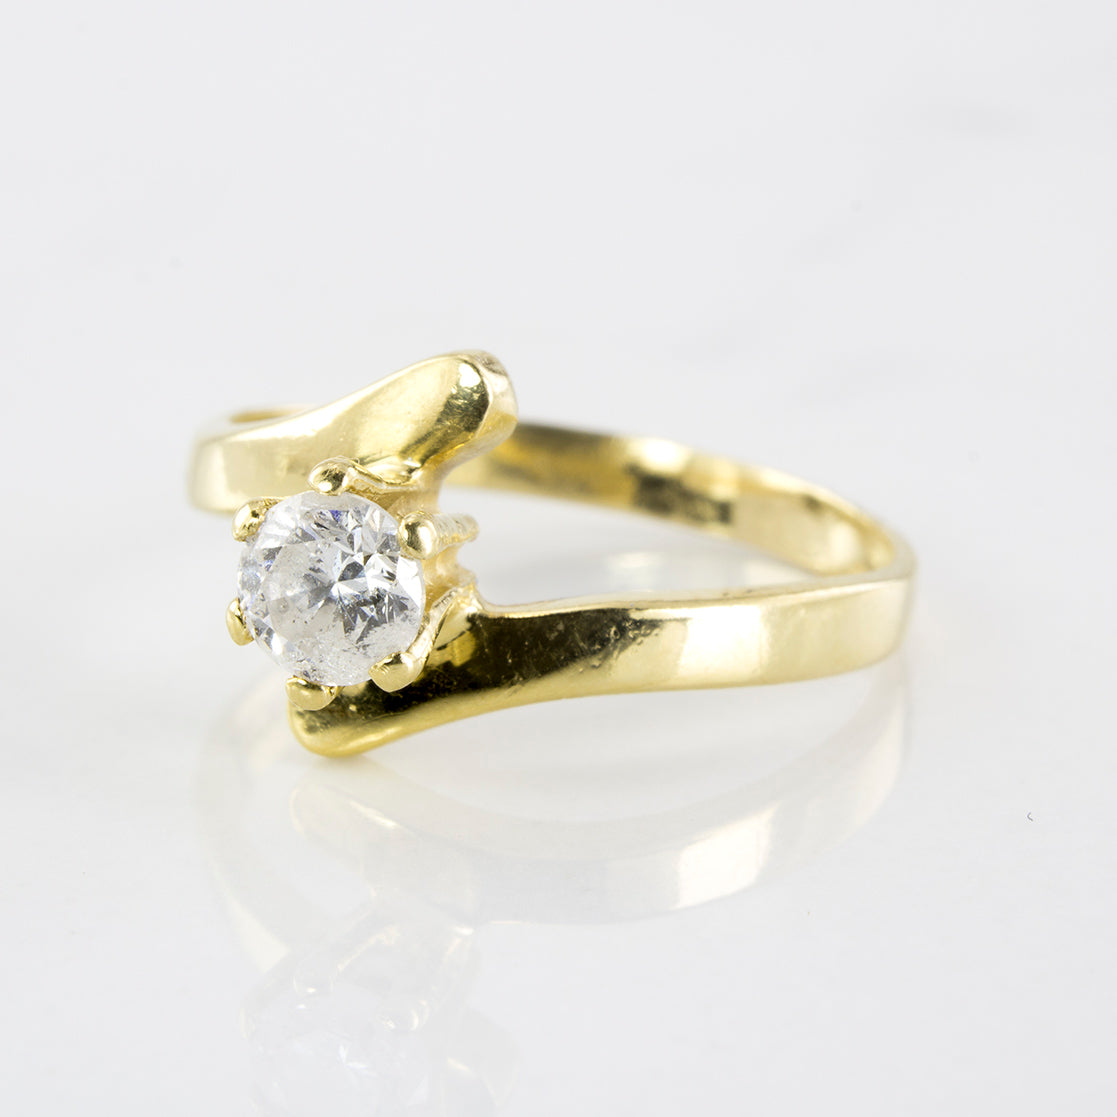 Bypass Diamond Solitaire Ring | 0.37 ctw | SZ 7.5 |